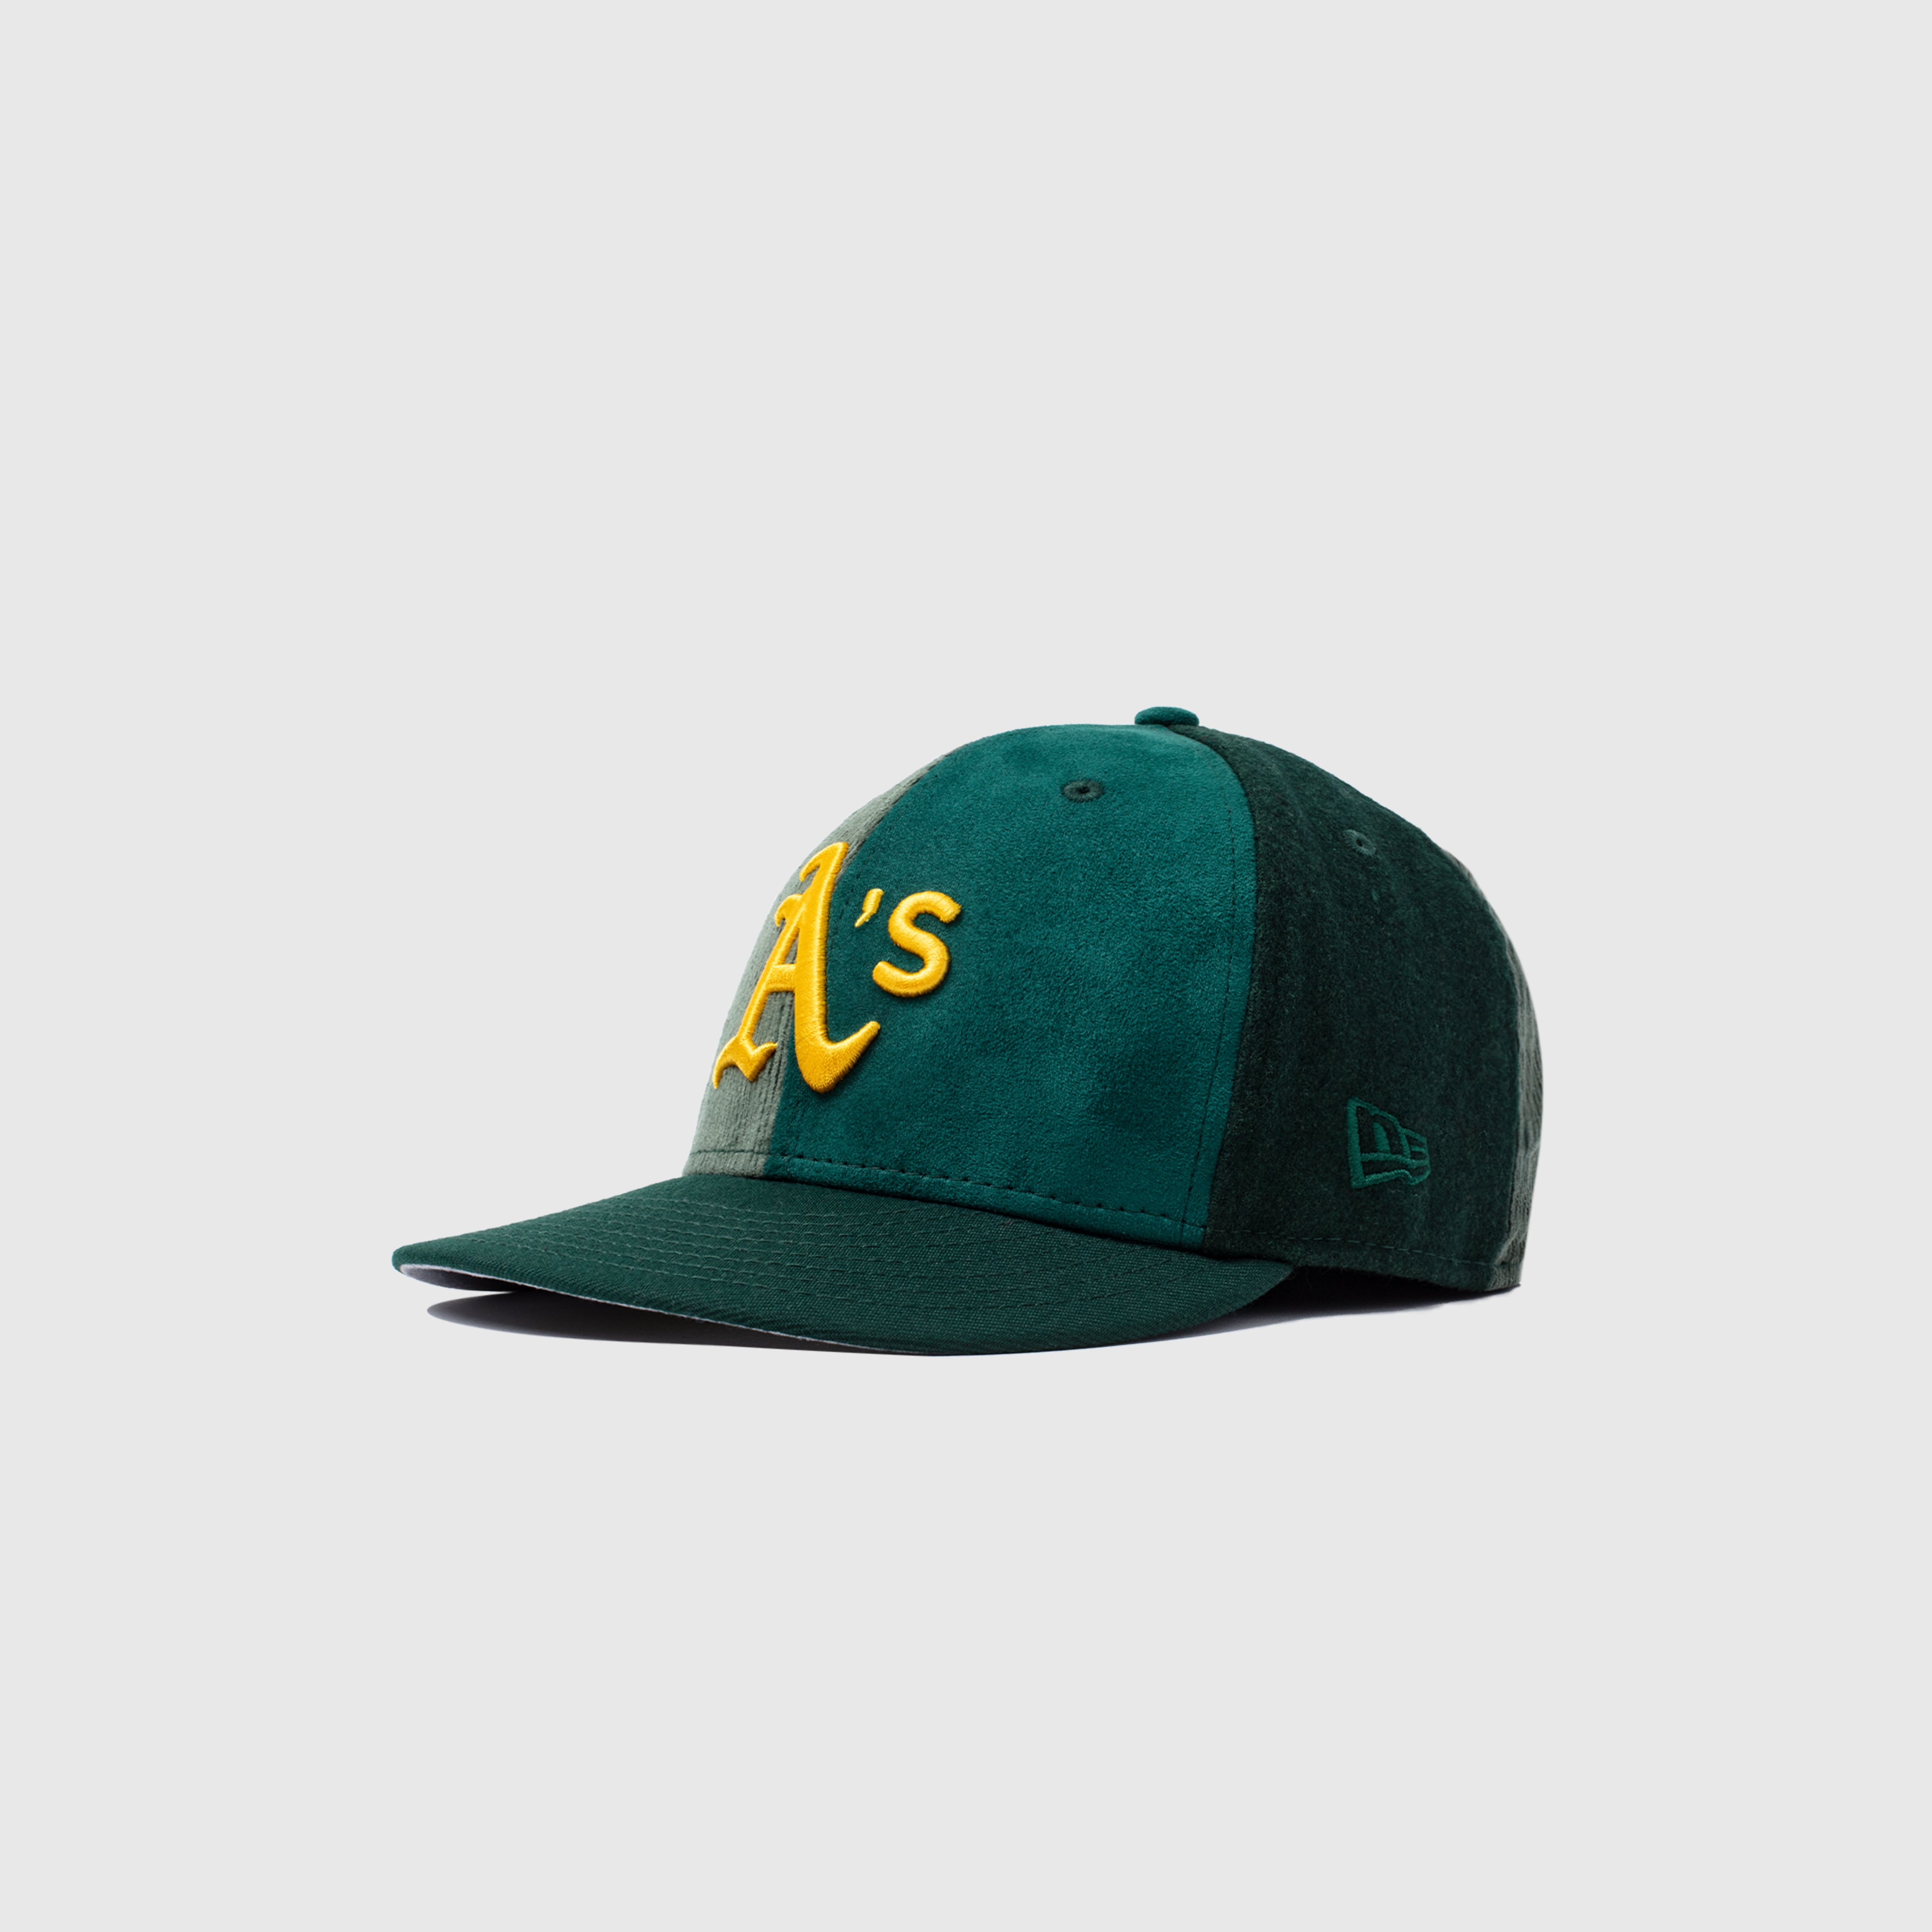 oakland cap - Buy oakland cap at Best Price in Malaysia